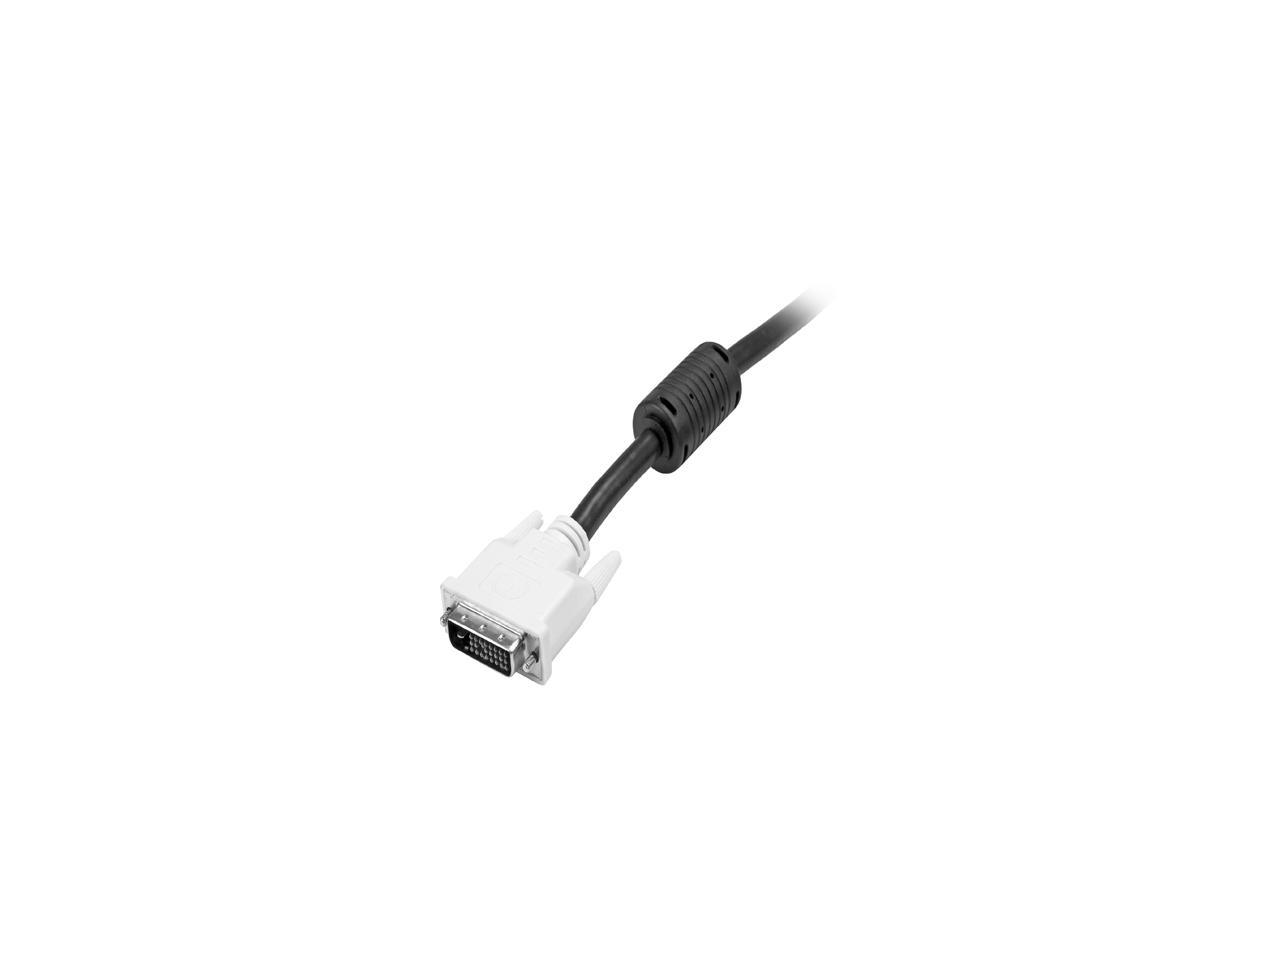 StarTech.com DVIDDMM6 Dual Link DVI Cable - 6 ft - Male to Male - 2560x1600 - DVI-D Cable - Computer Monitor Cable - DVI Cord - Video Cable